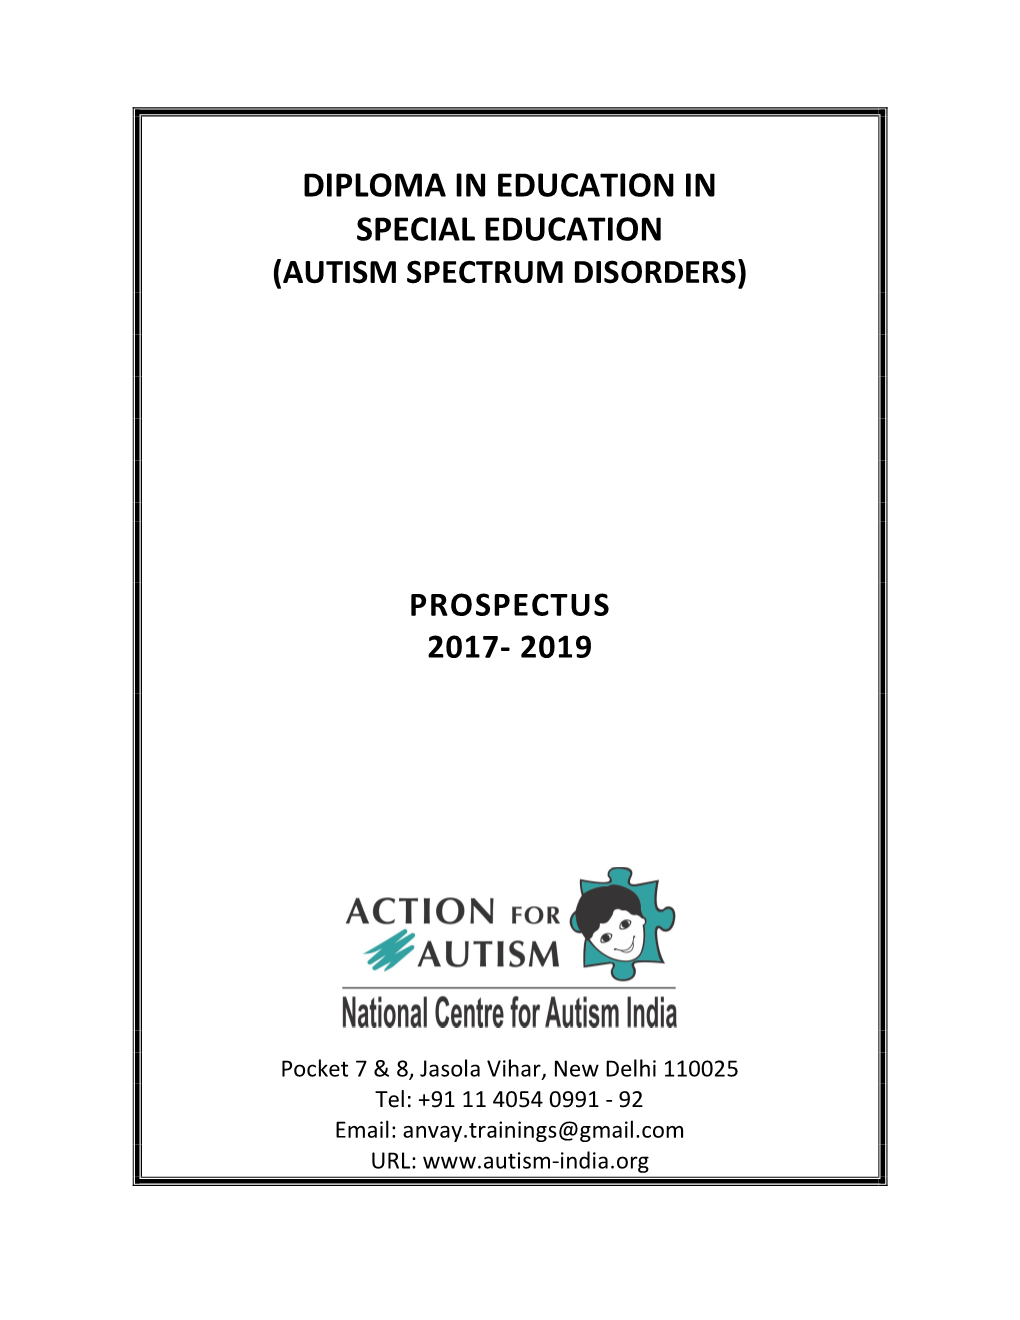 Diploma in Education in Special Education (Autism Spectrum Disorders)